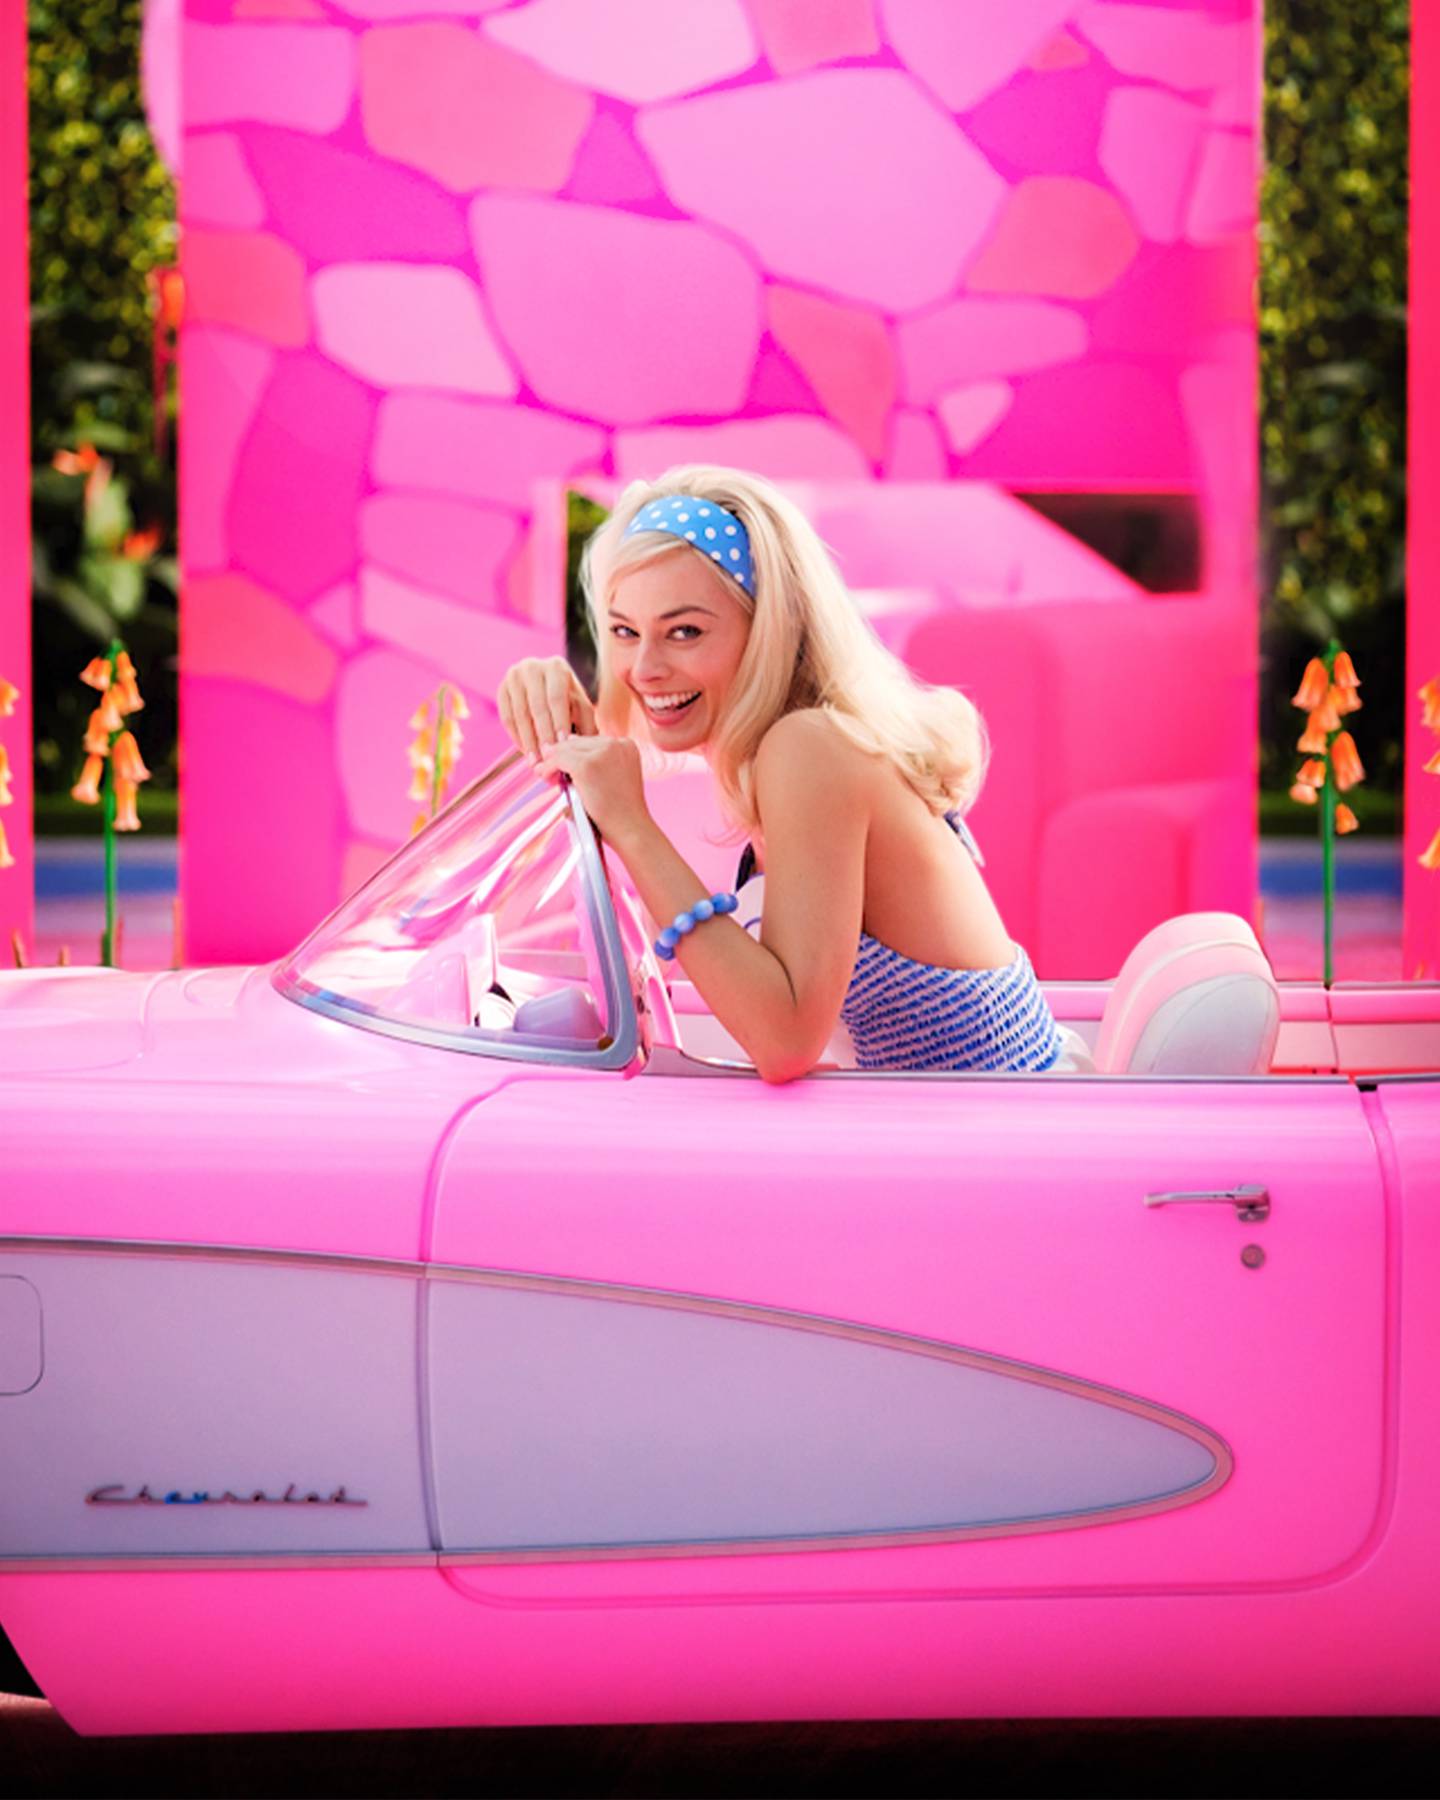 Margie Robbie in a preview scene from the coming 2023 motion picture 'Barbie'. Photo: Warner Bros. Pictures